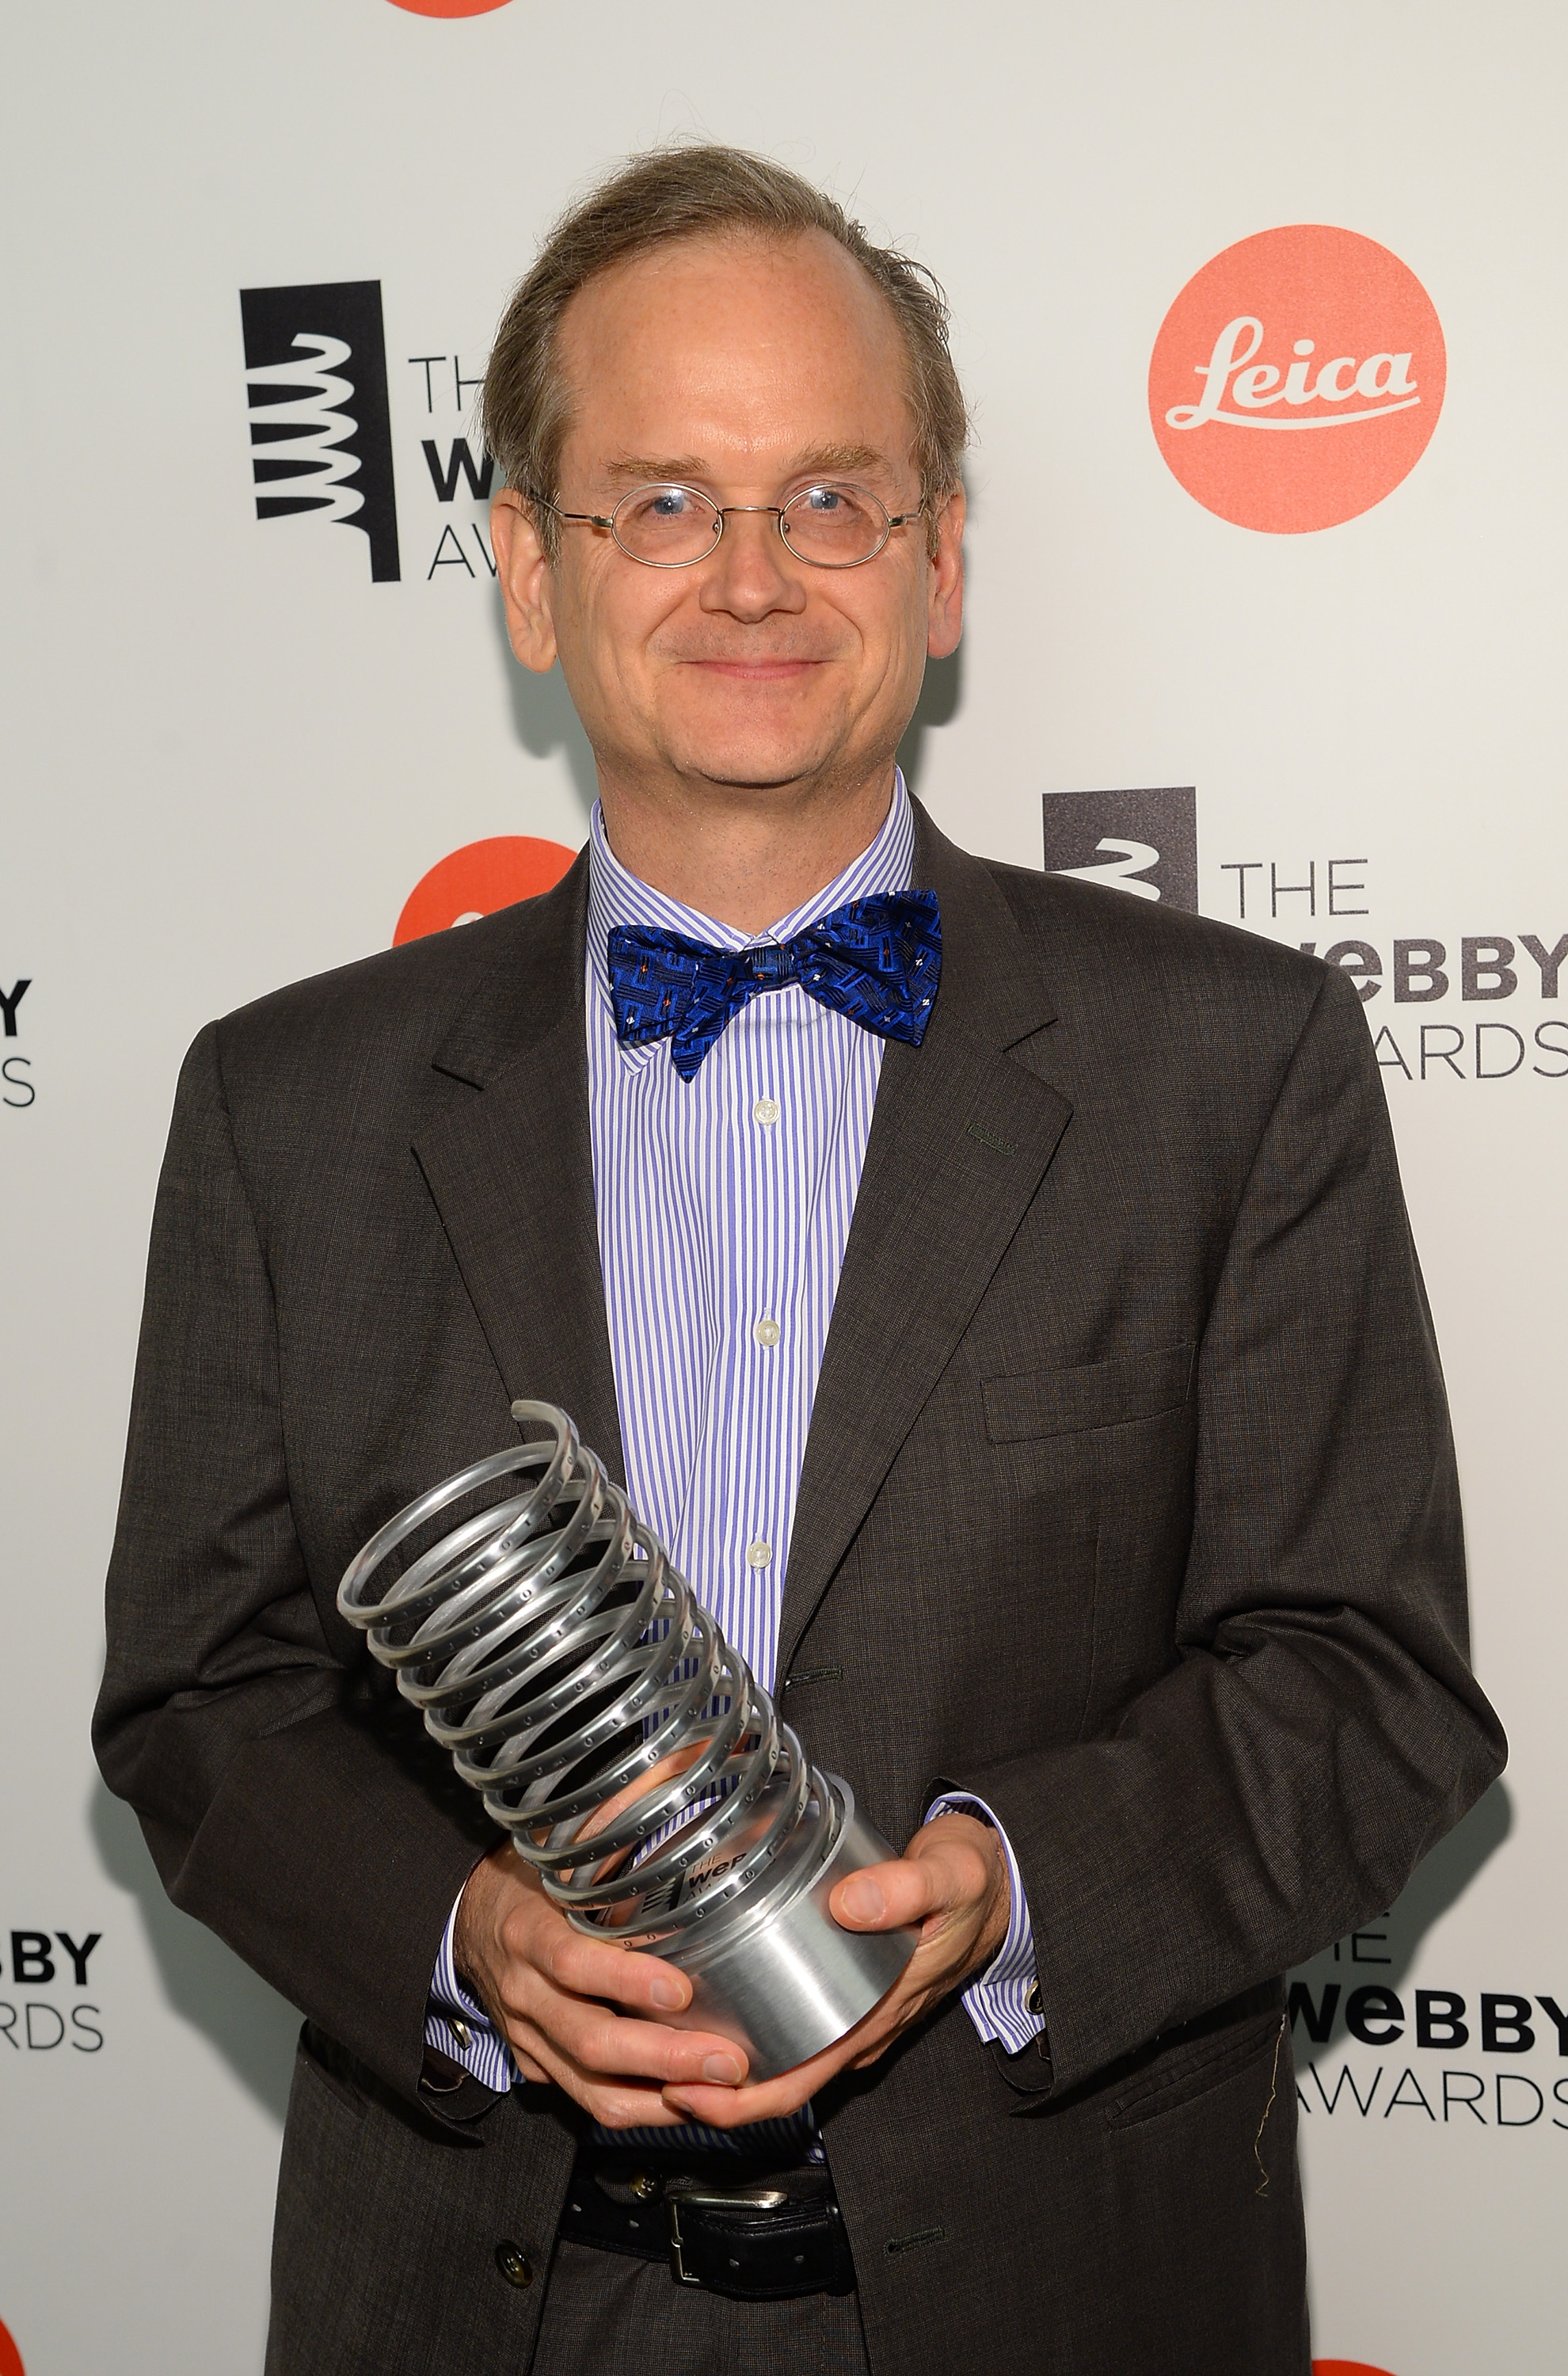 Professor Lawrence Lessig poses backstage at the 18th Annual Webby Awards on May 19, 2014 in New York City. (Theo Wargo—2014 Getty Images)